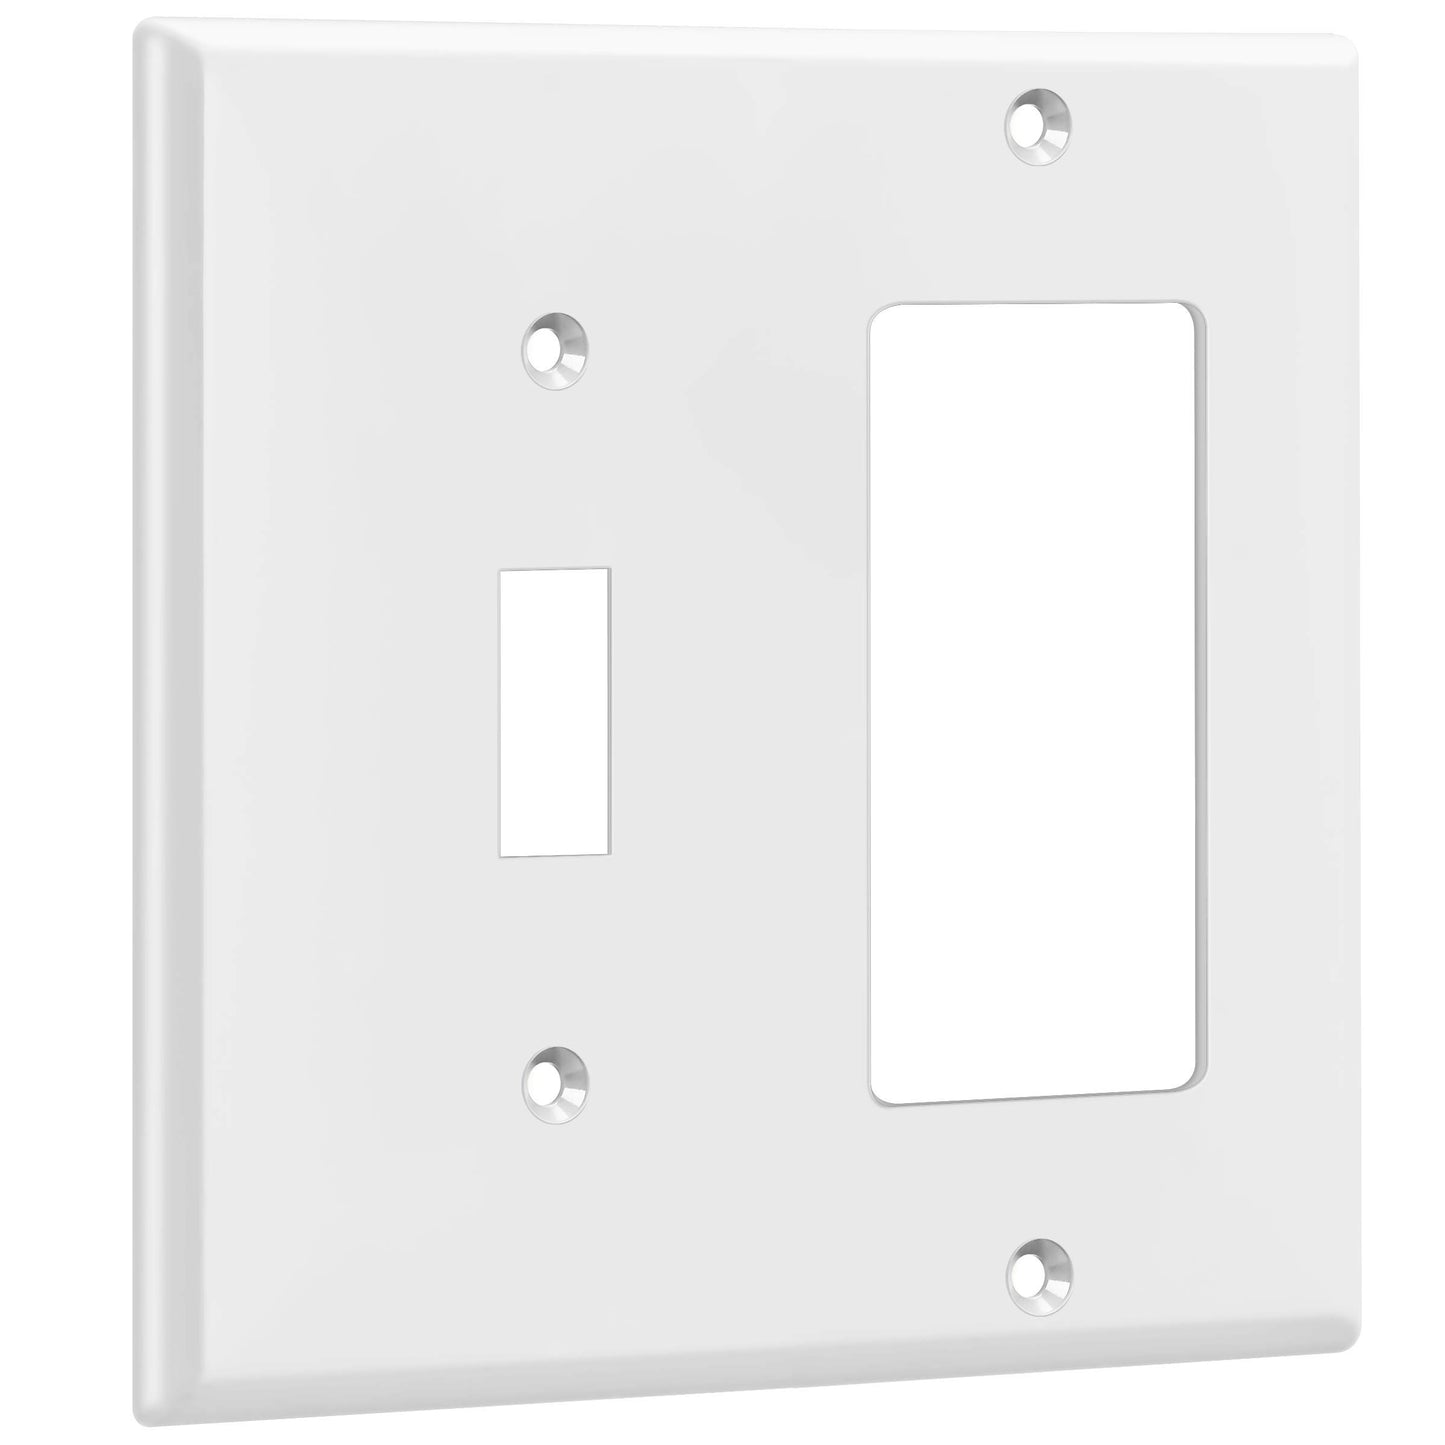 ENERLITES Combination Toggle Light Switch/Decorator Switch Wall Plate, Mid-Size 2-Gang 4.88" x 4.92", Polycarbonate Thermoplastic, 881131M-W, White